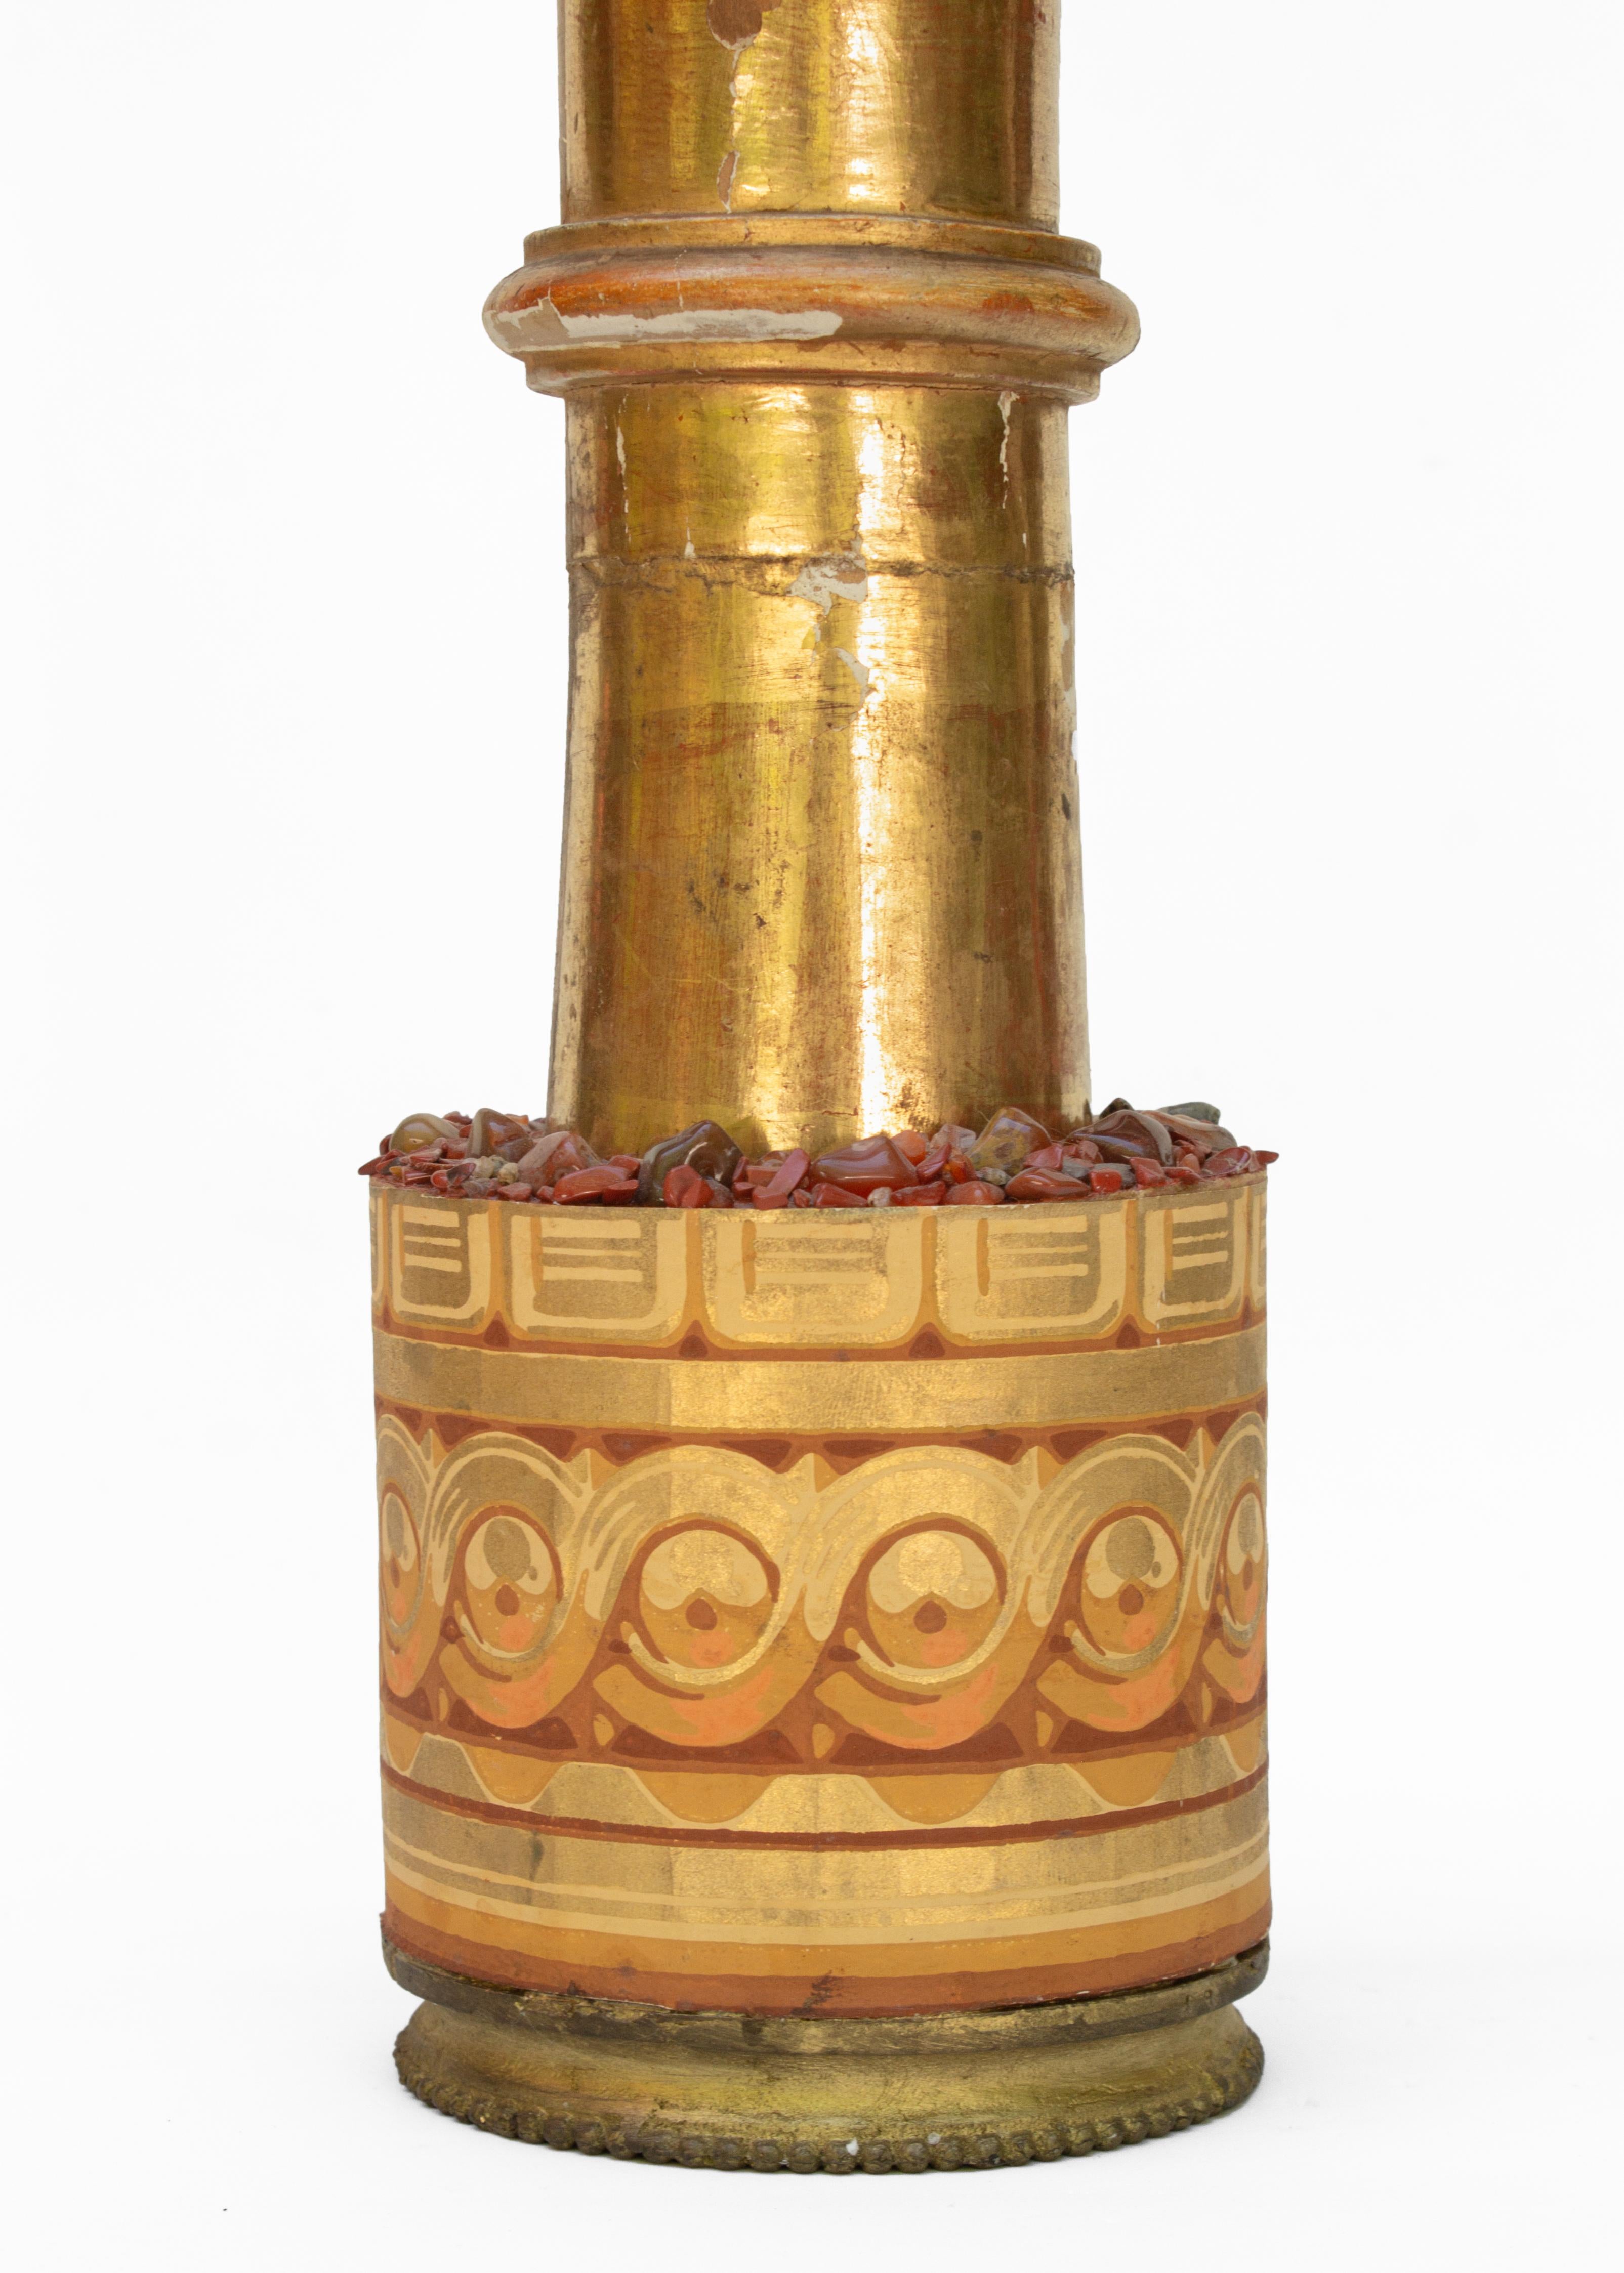 18th century Italian gold leaf wood candlestick with a coordinating antique wallpaper base decorated with polished jasper stones. The gold leaf candlestick originates from a large church in Florence and sits on a brass metal base. The number on the